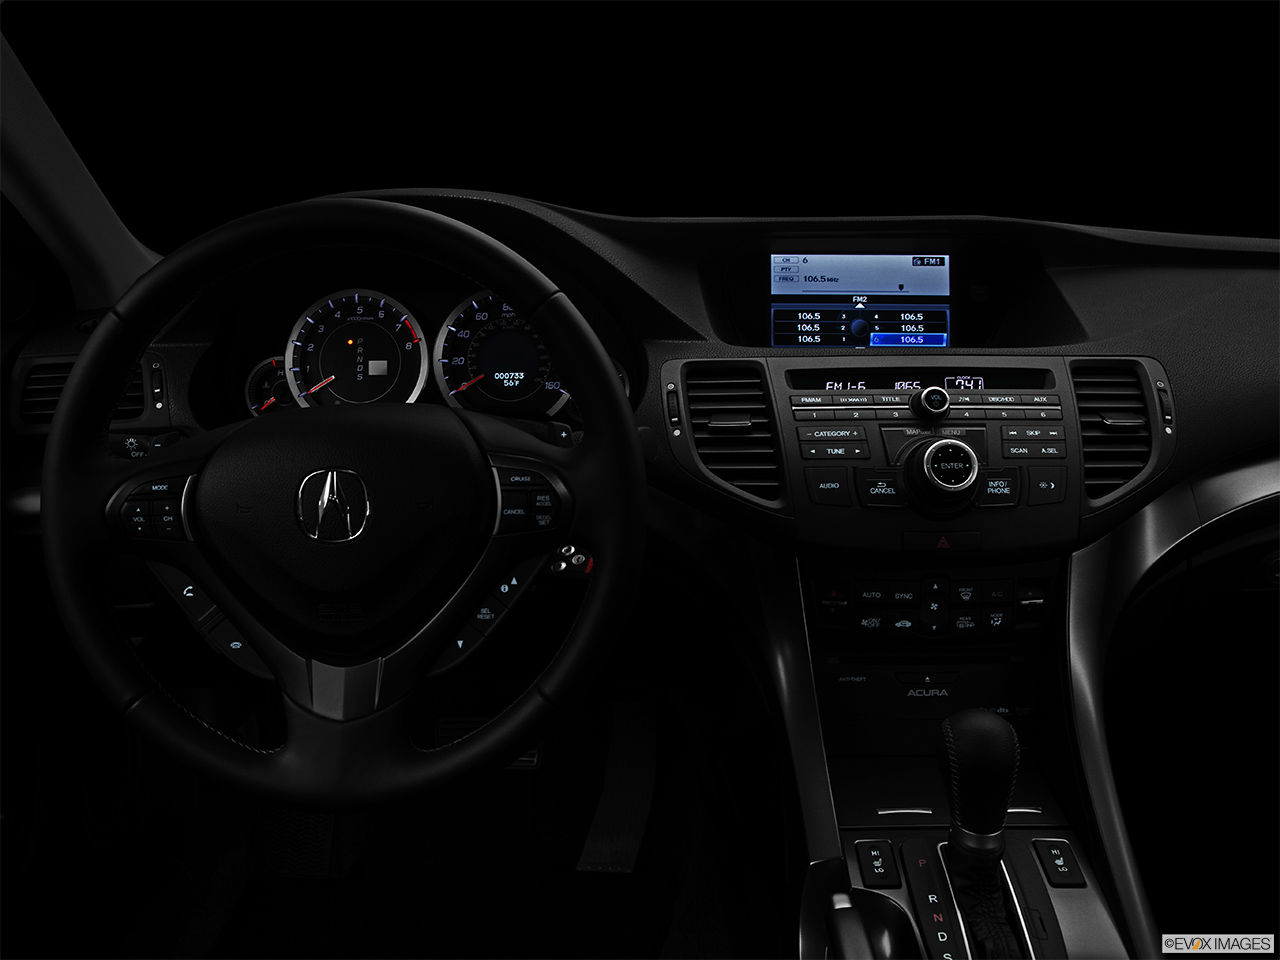 2013 Acura TSX 5-Speed Automatic Centered wide dash shot - "night" shot. 